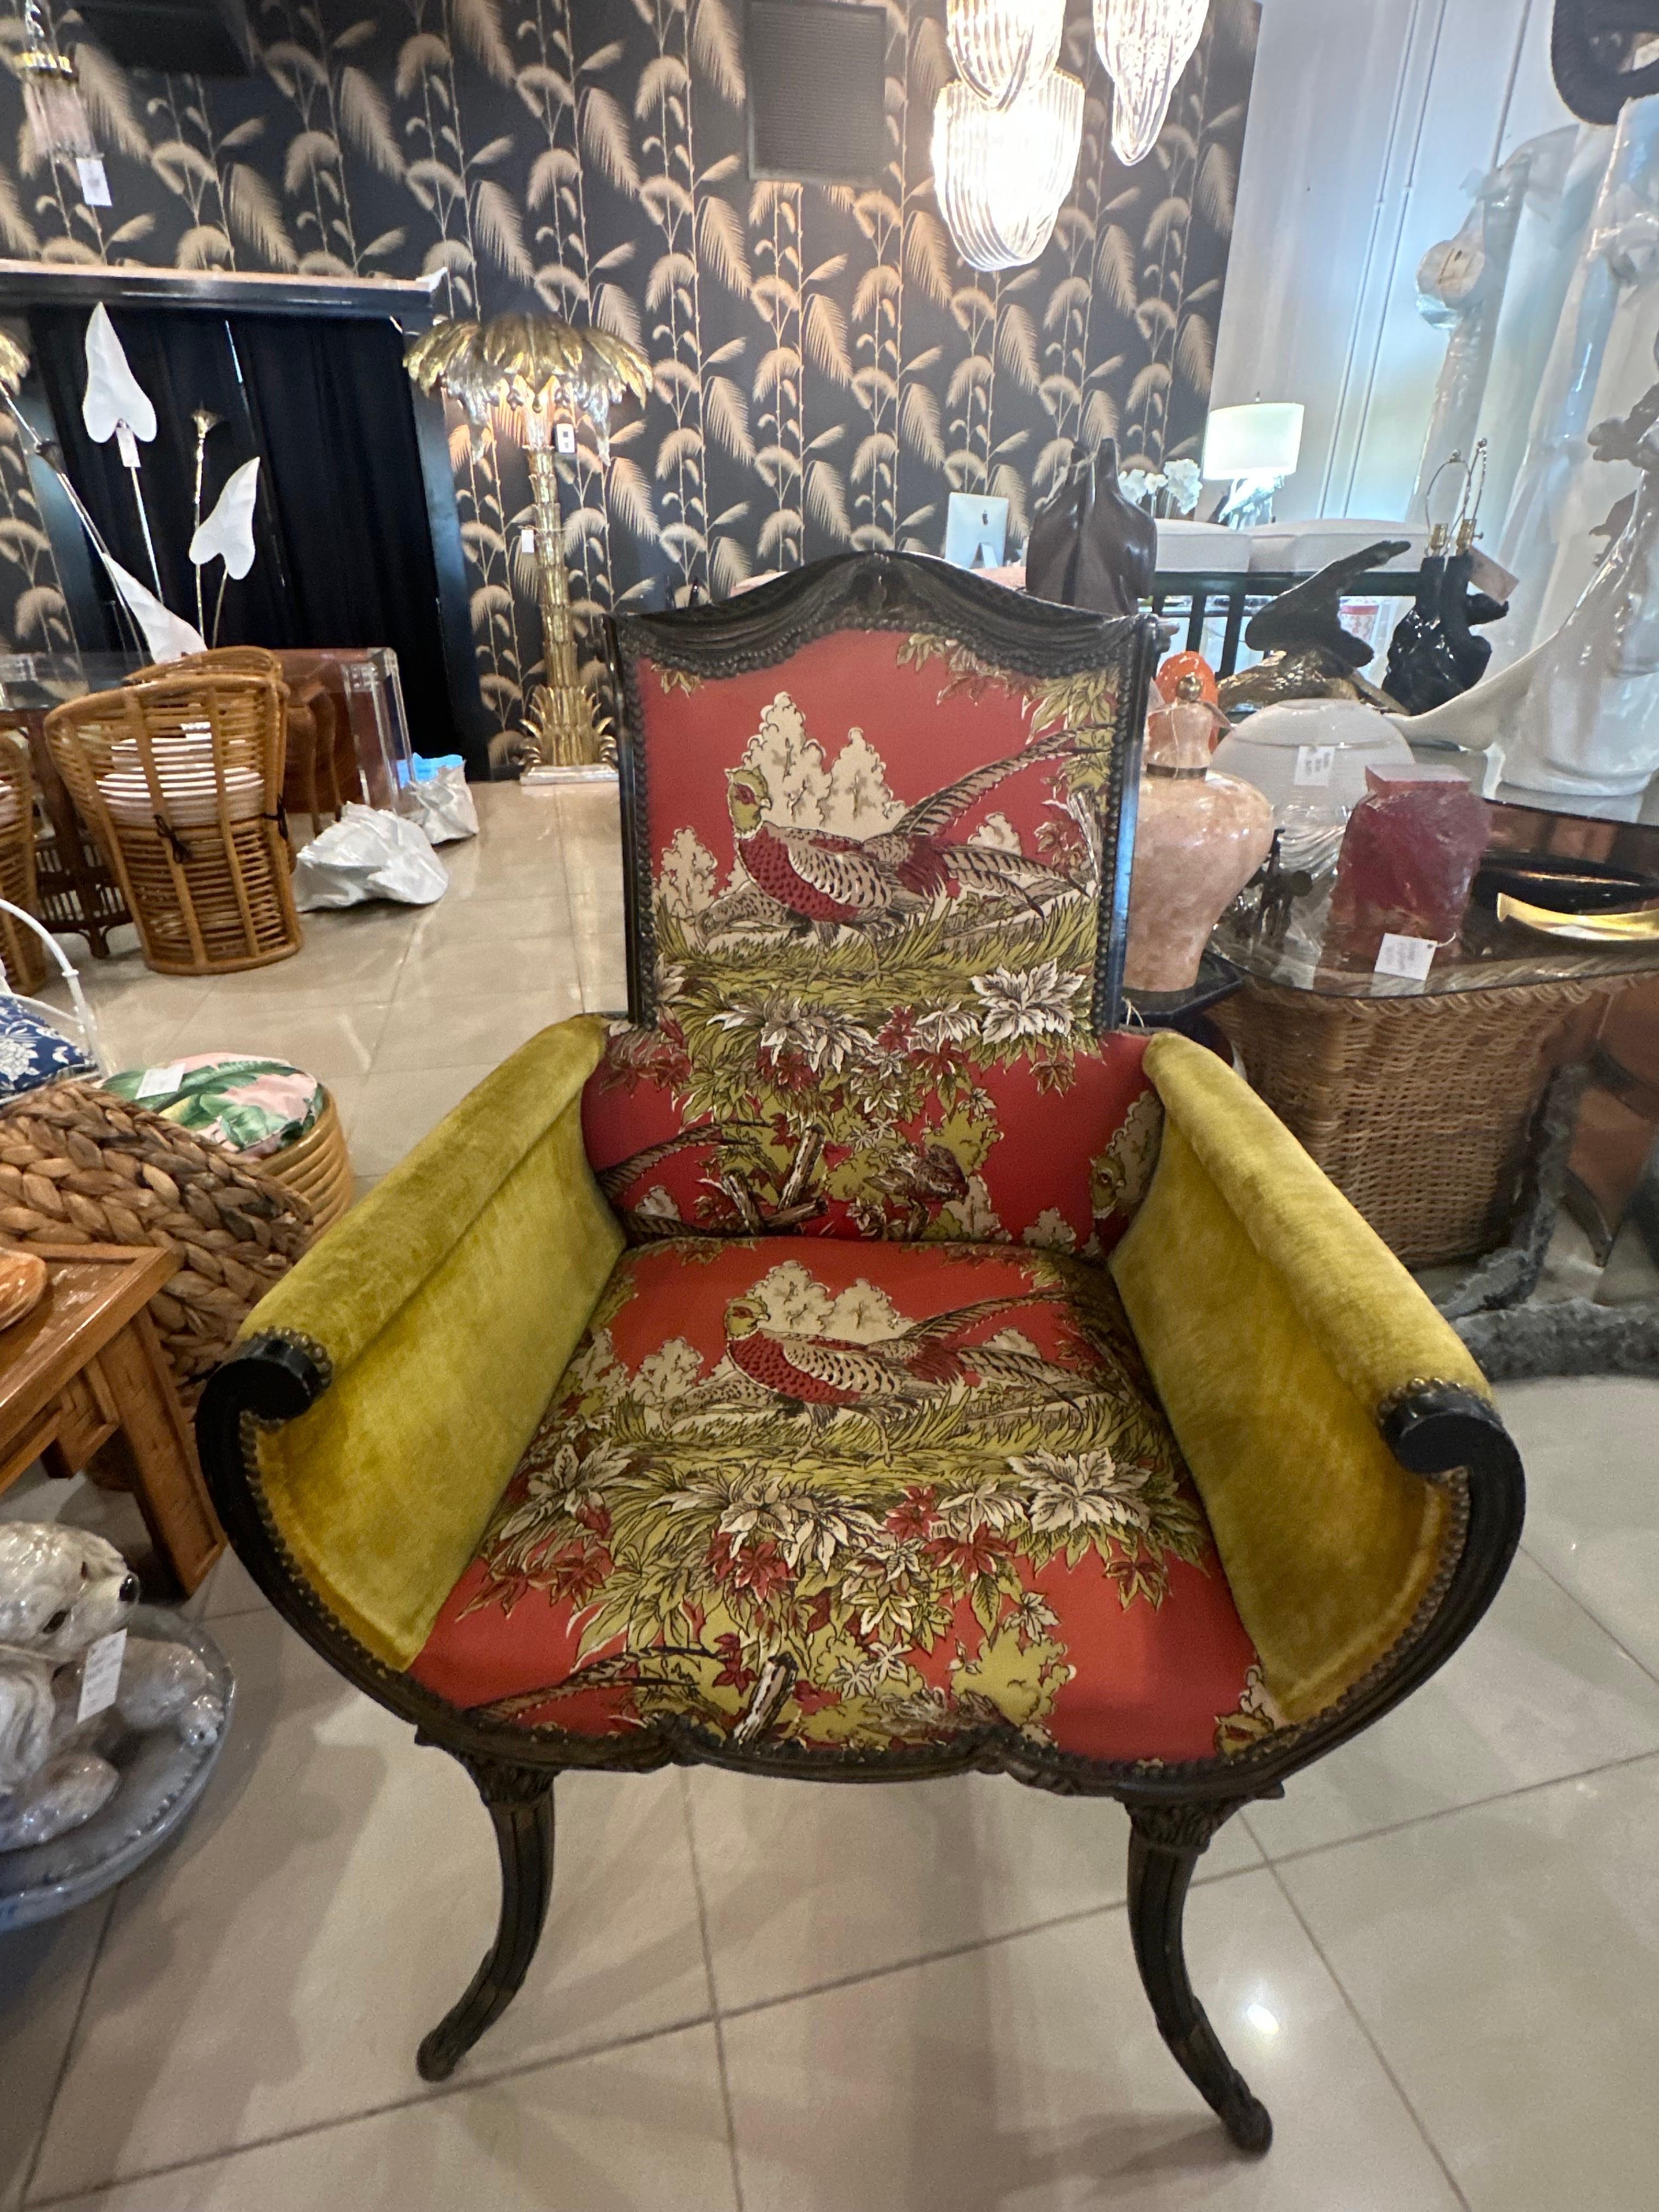 Beautiful antique pagoda chinoiserie 1900s chair with flare sides. Original upholstery which may have some discoloring and or minor imperfections. Please view photos. Incredible nailhead details. Dimensions: 42 H x 27.5 W x 22.5 D. Seat height 19.5.